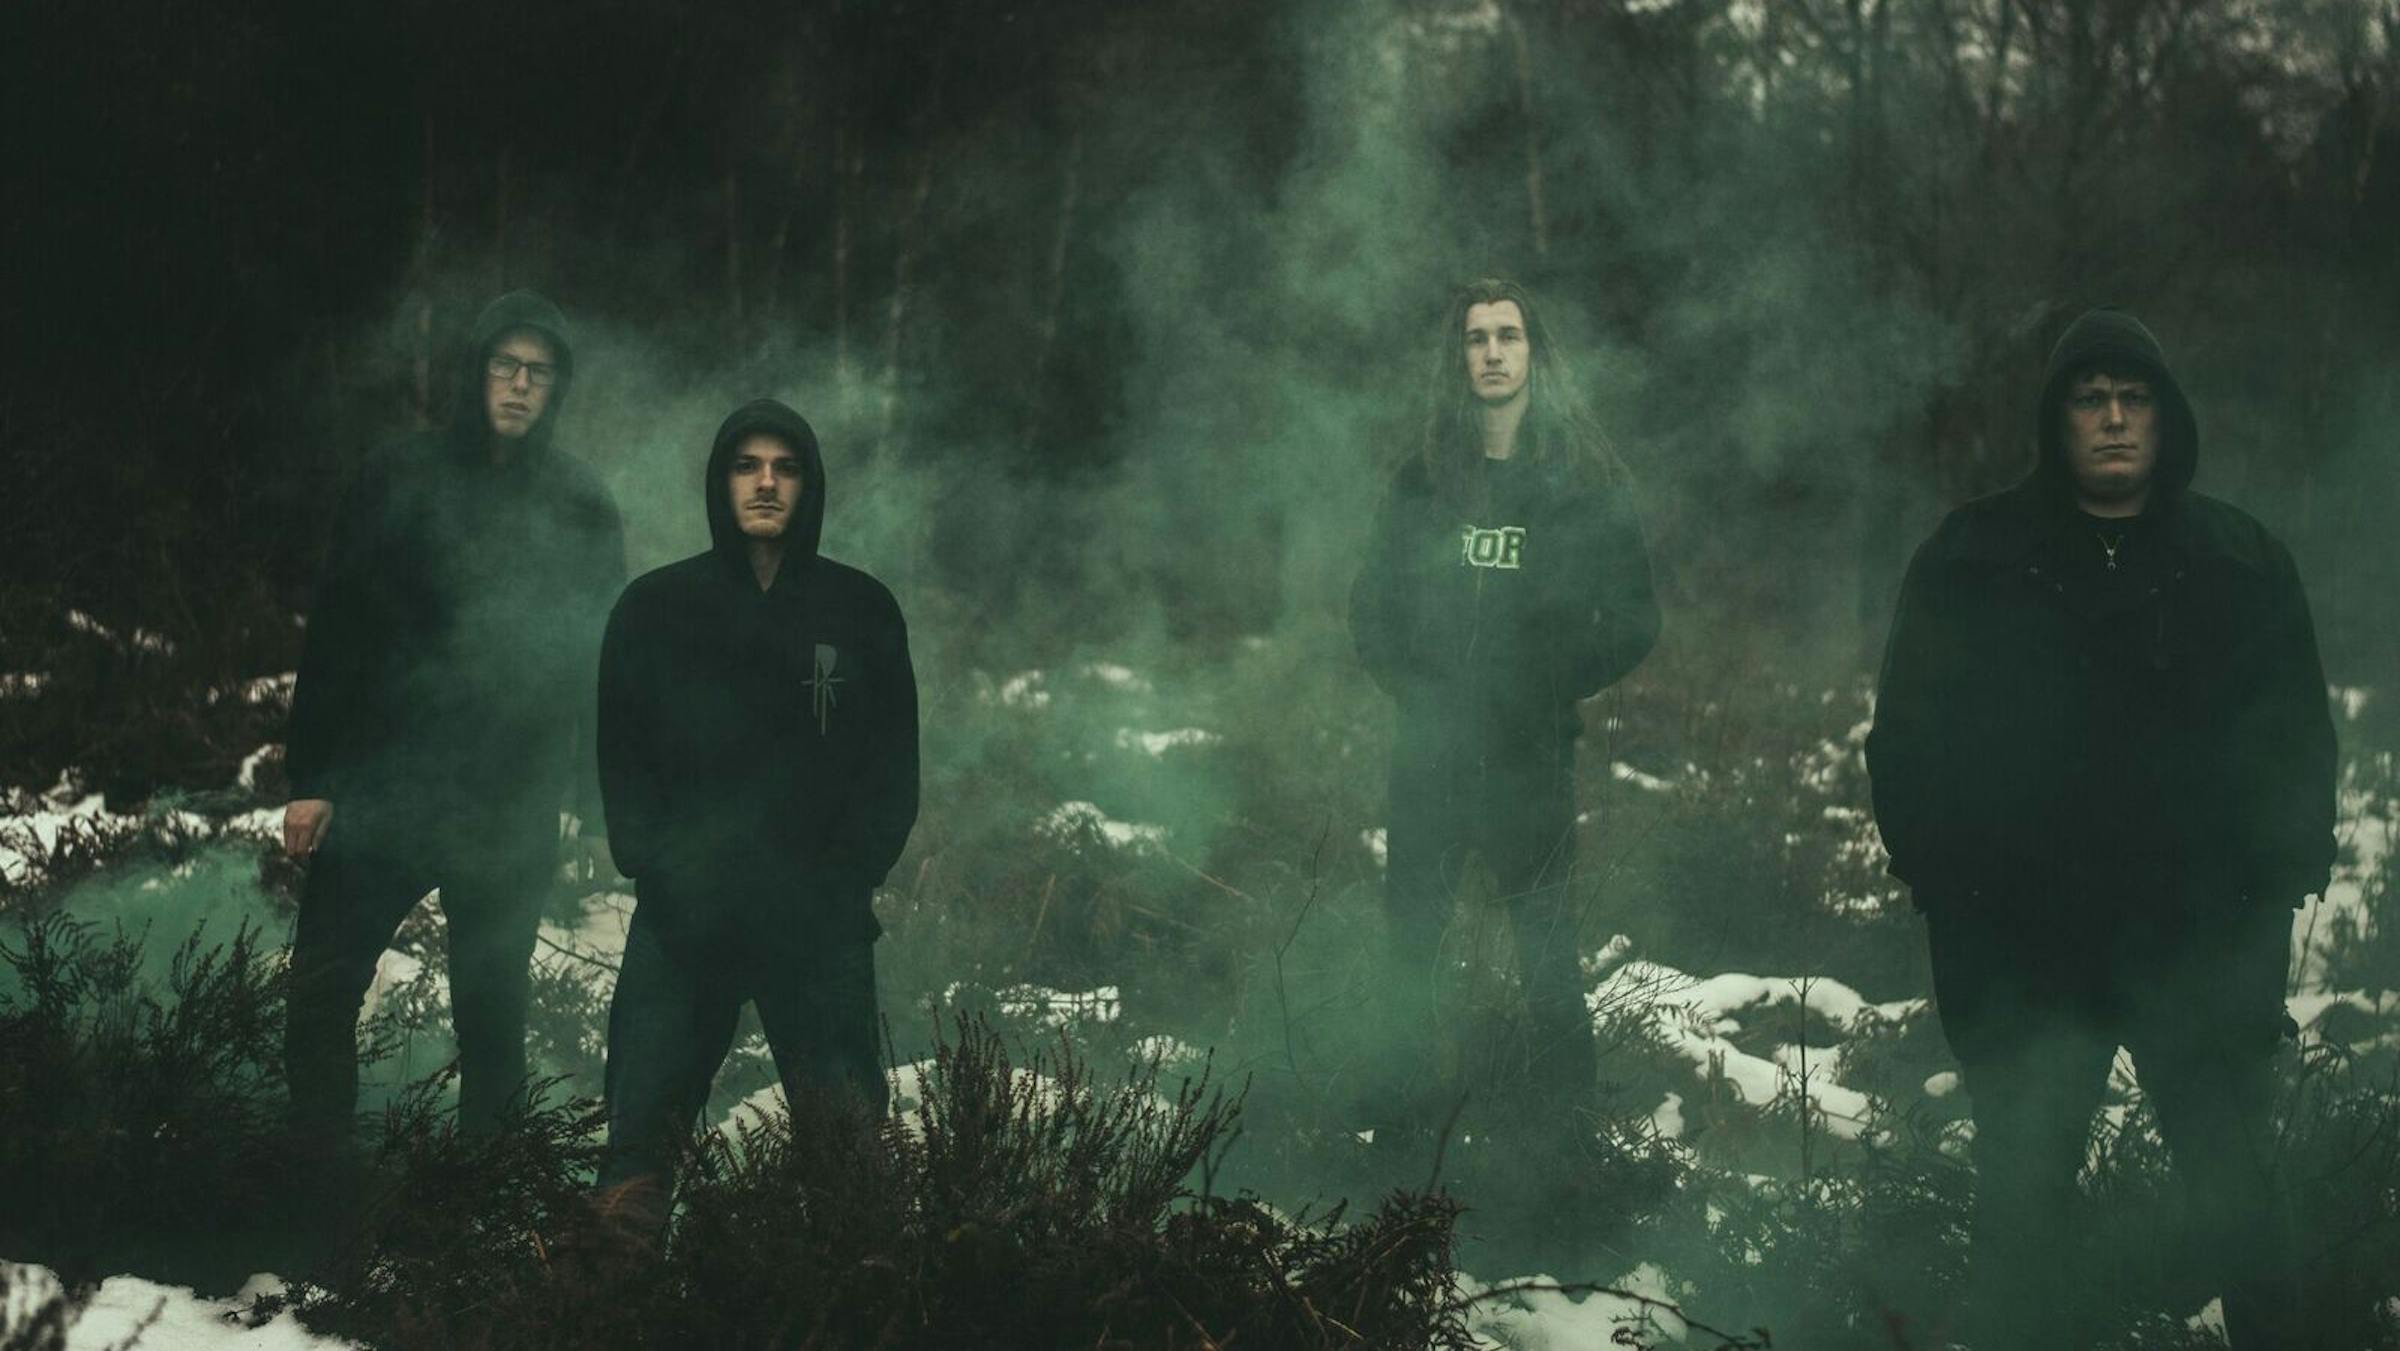 Conjurer: The “Non-Specific UK Metal Band” America Needs